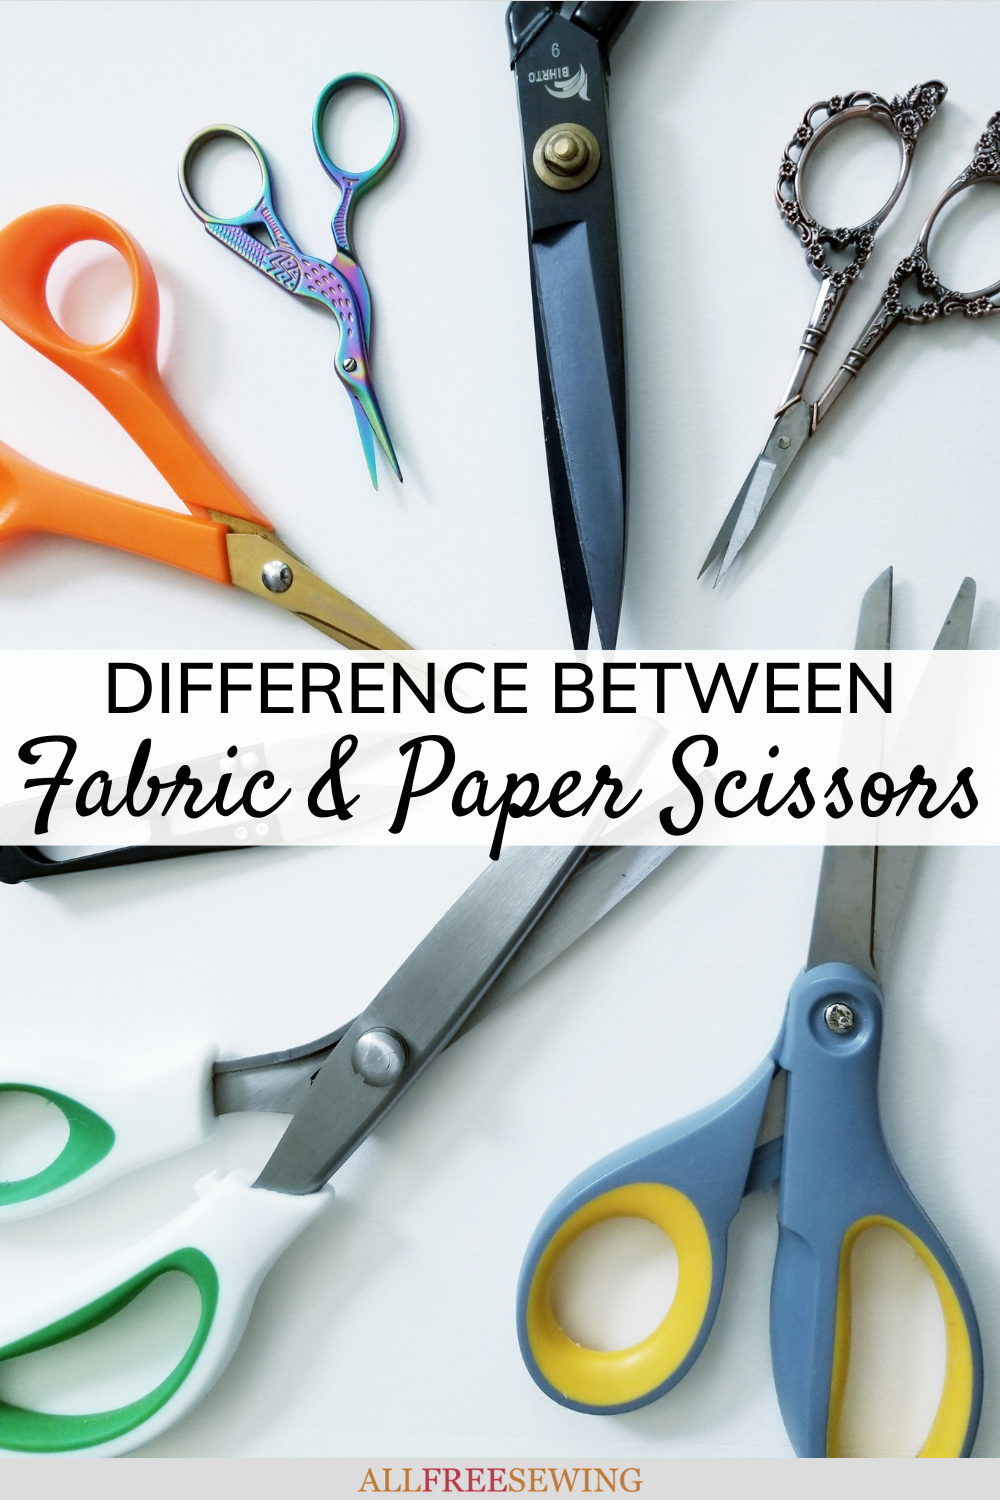 https://irepo.primecp.com/2022/07/531132/Difference-Between-Fabric-Paper-Scissors-pin21-1_UserCommentImage_ID-4844239.png?v=4844239